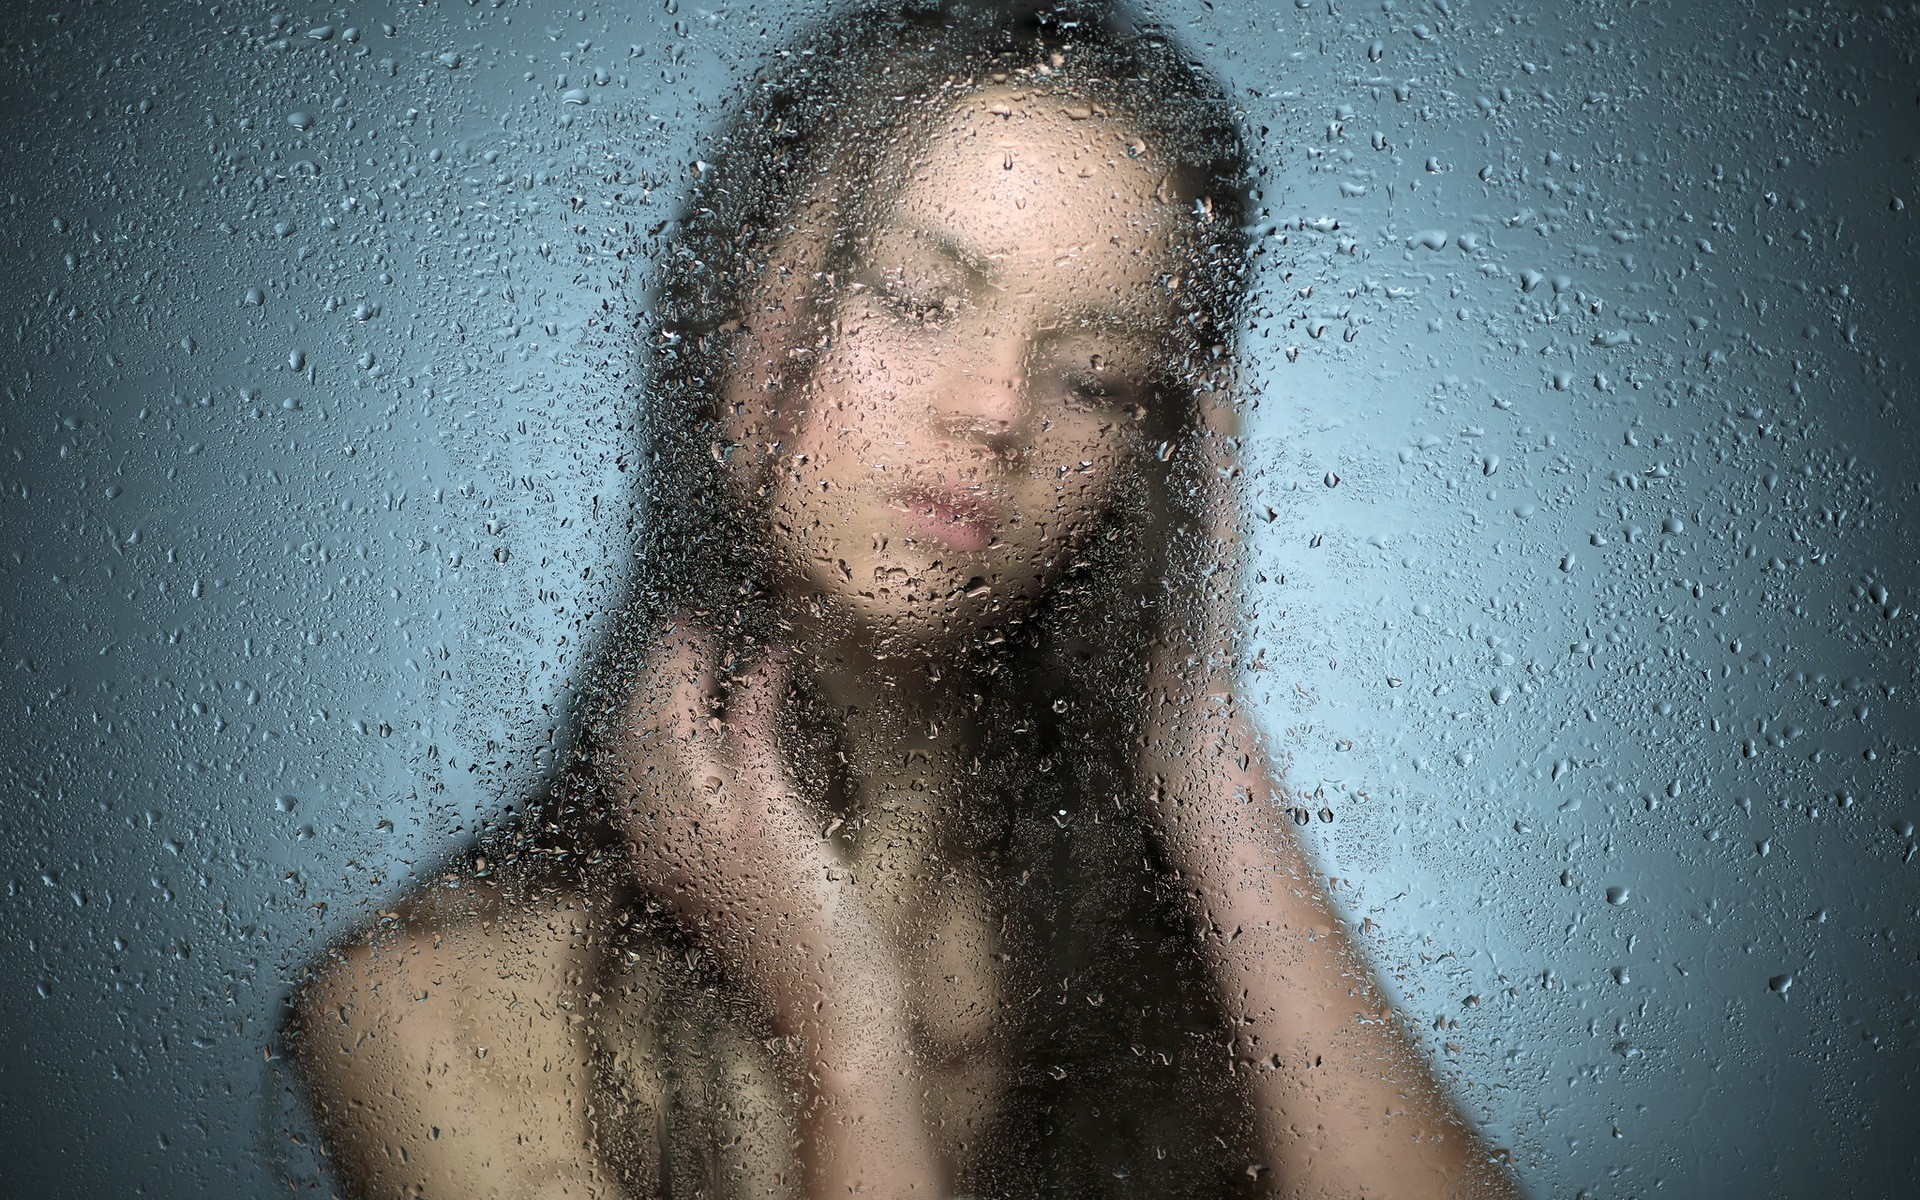 People 1920x1200 wet glass blurred women water on glass closed eyes behind the glass women indoors indoors implied nude